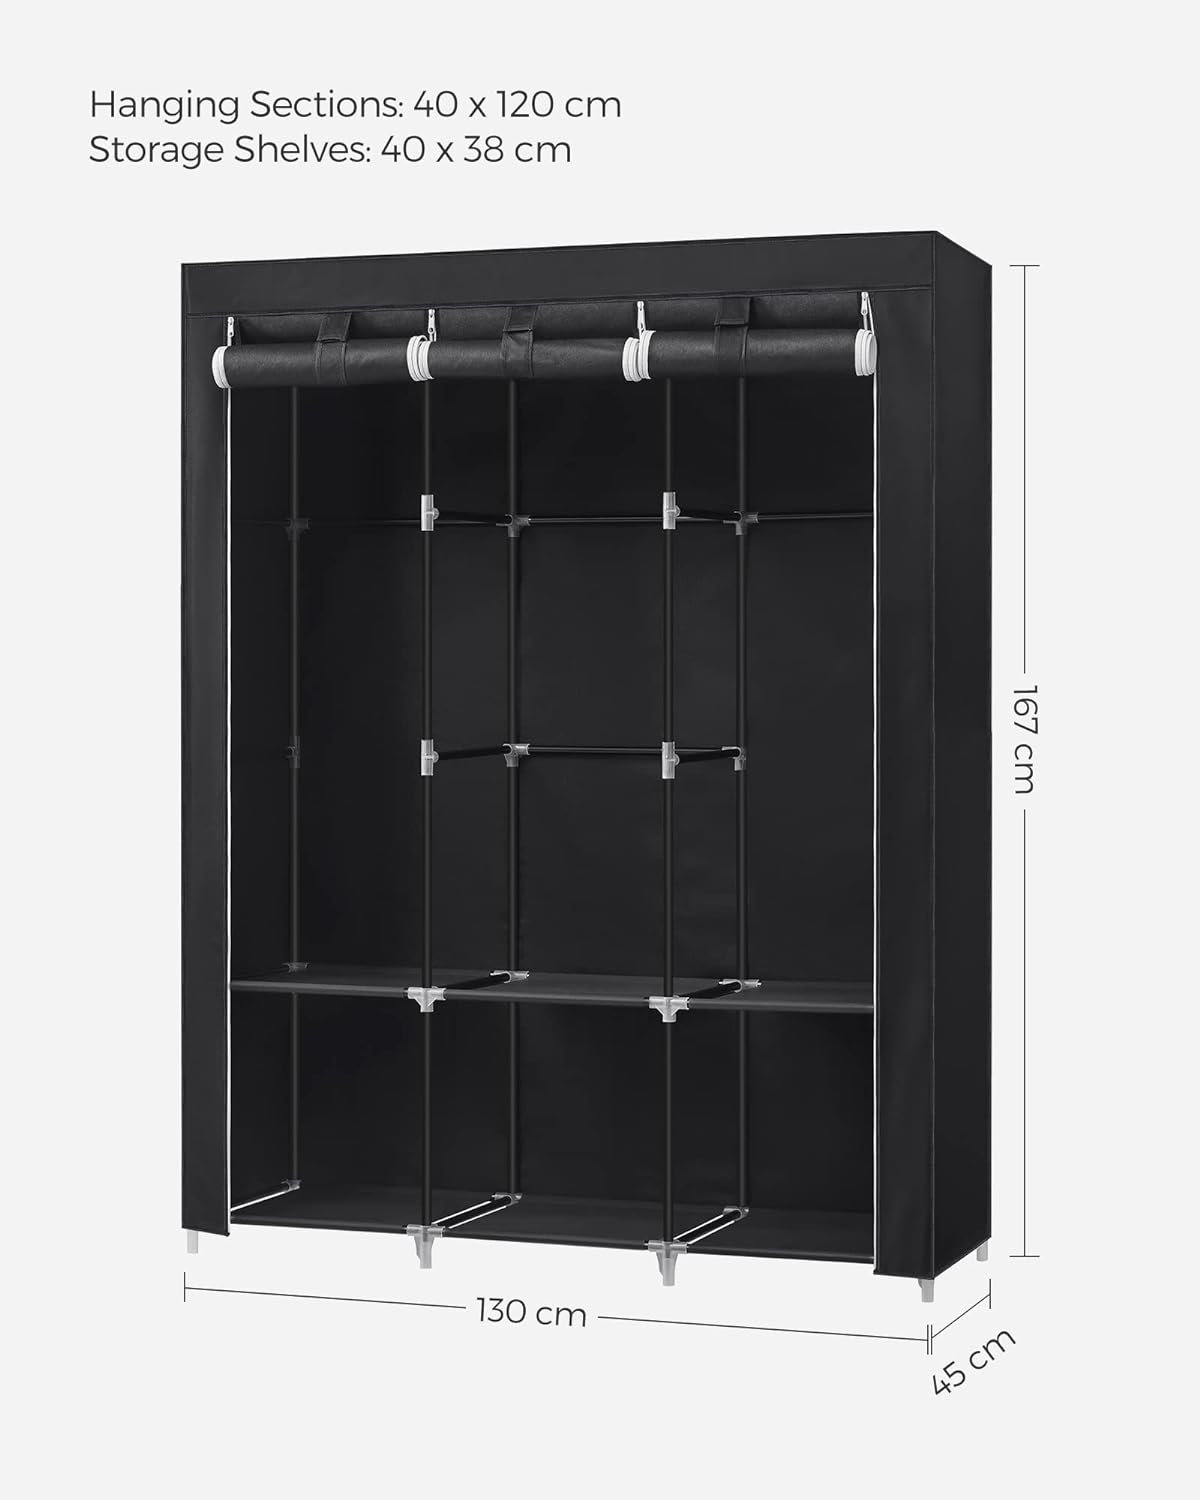 SONGMICS Clothes Wardrobe Portable Closet with Cover and 3 Hanging Rails Black